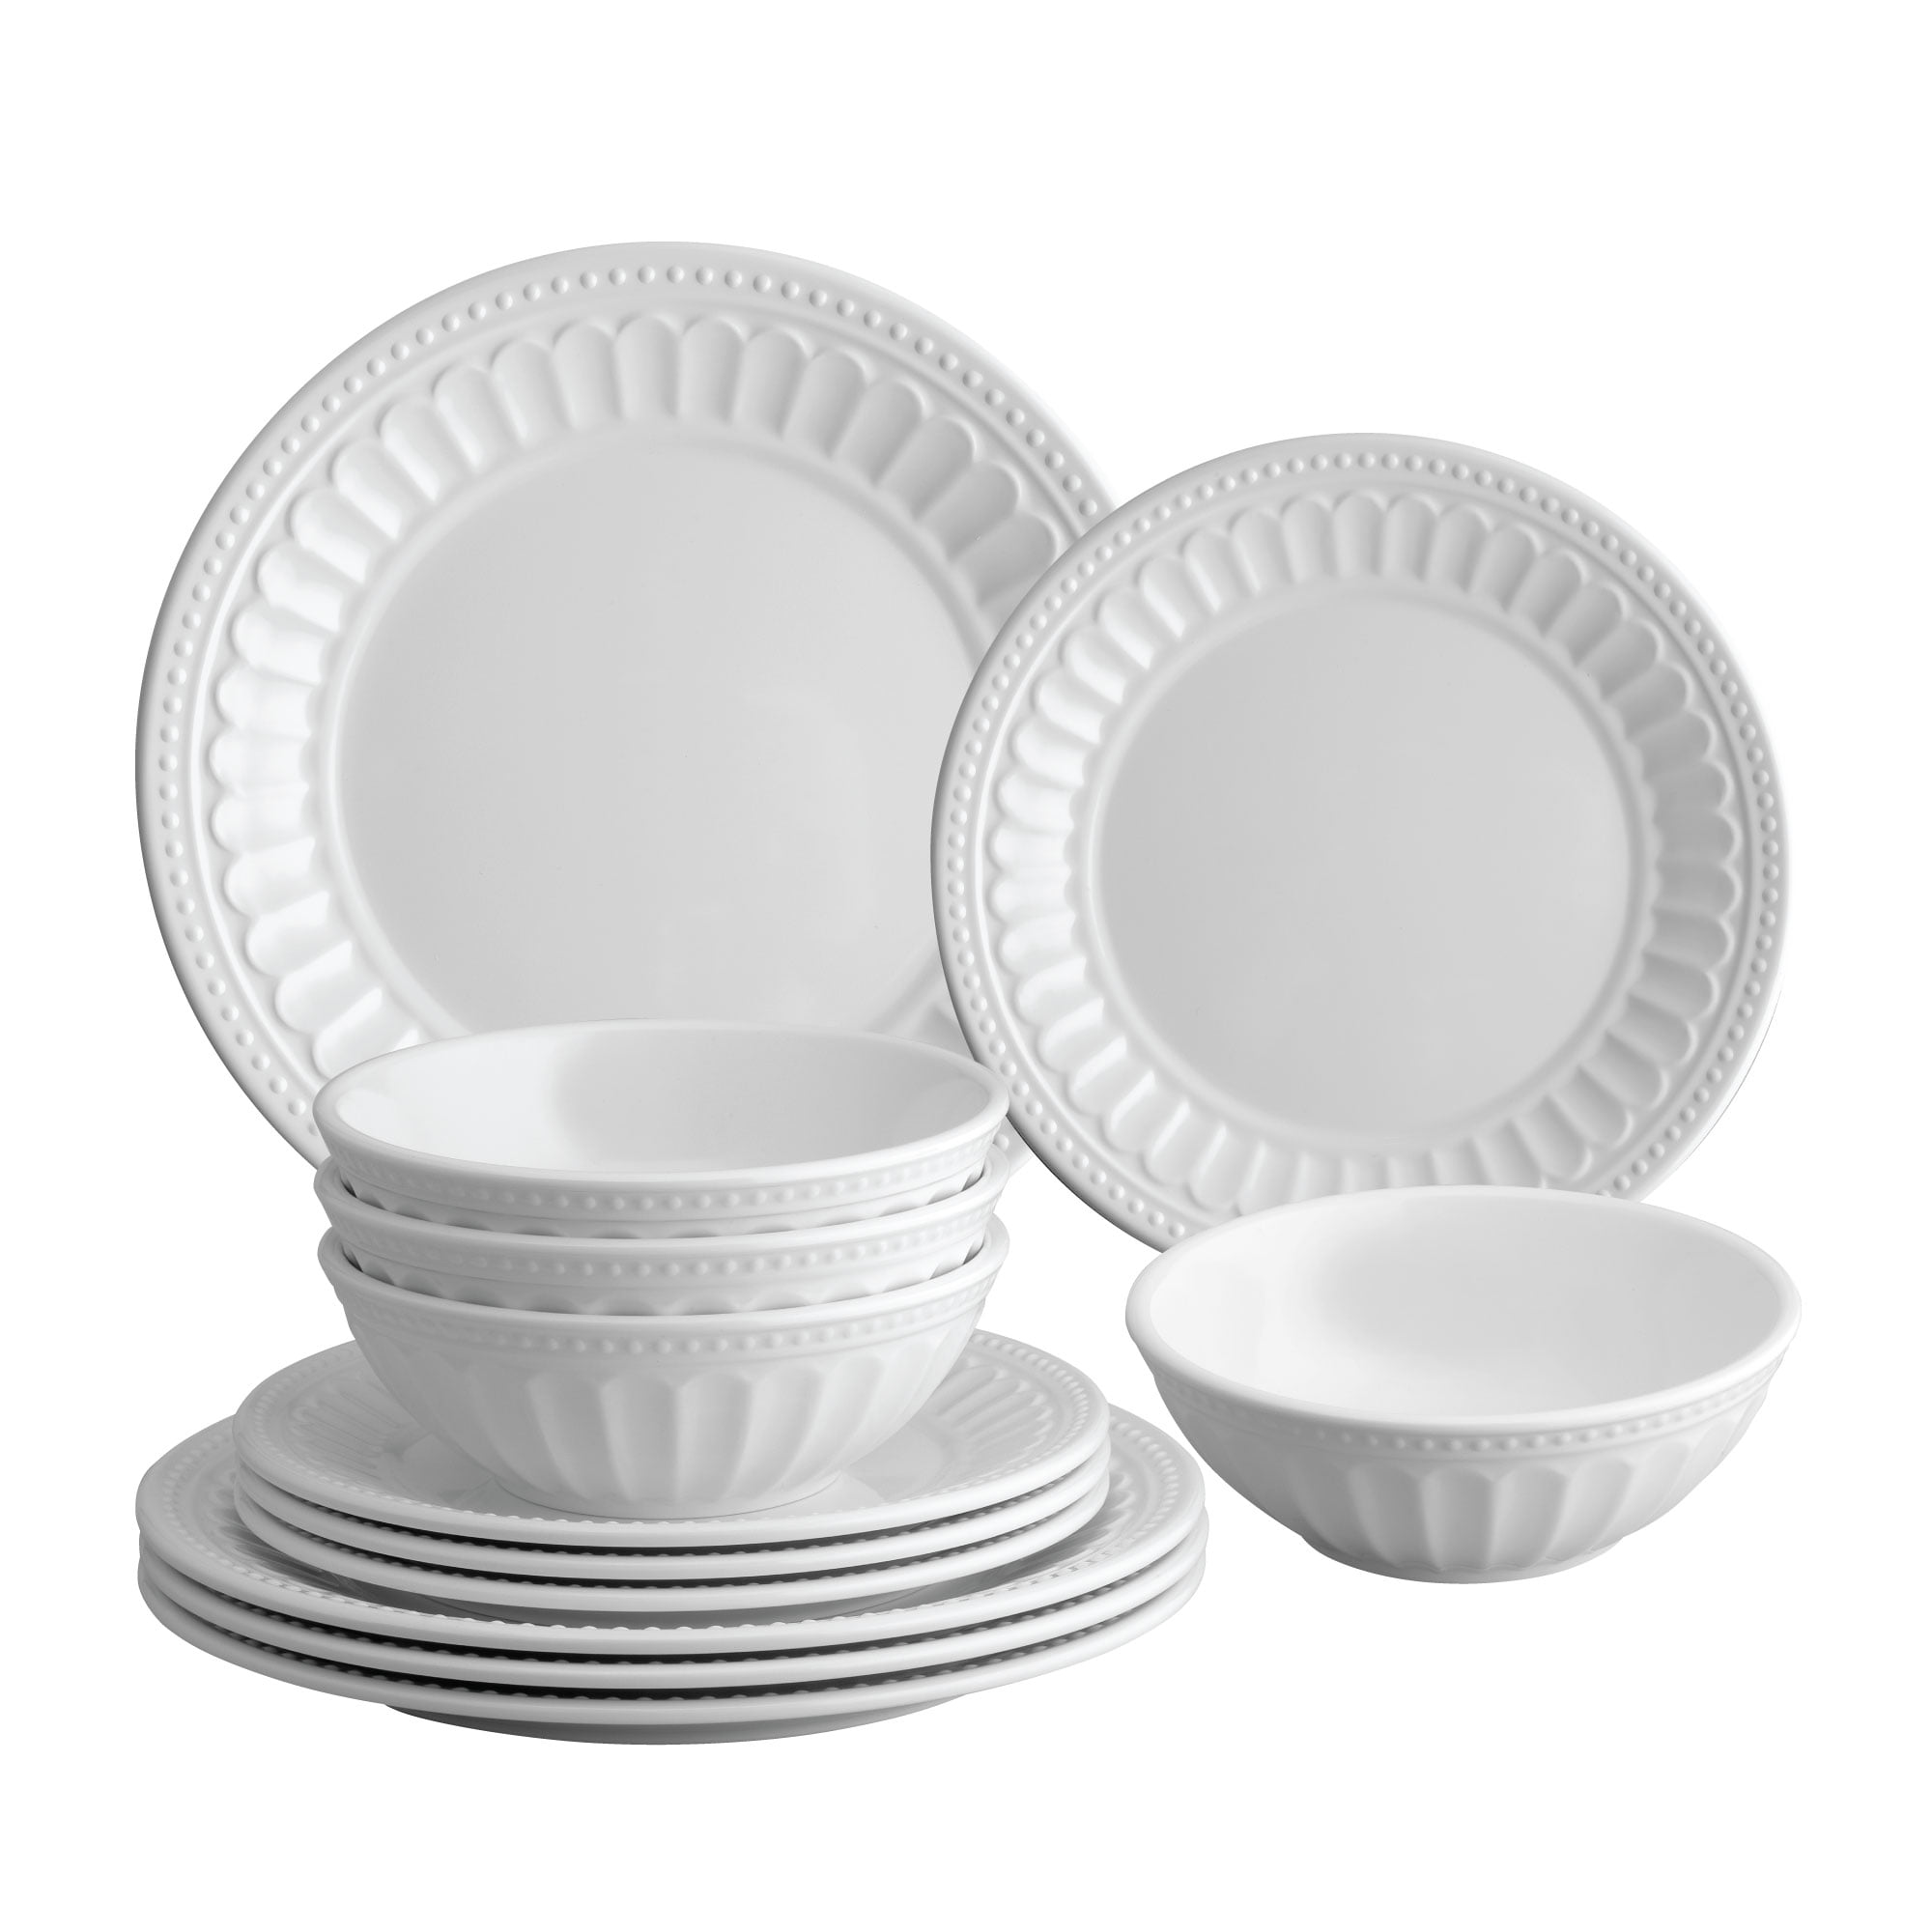 Details about   12 Piece Dinnerware Set For 4 Melamine Dishes Plates Salad Bowls Wood Grey New 